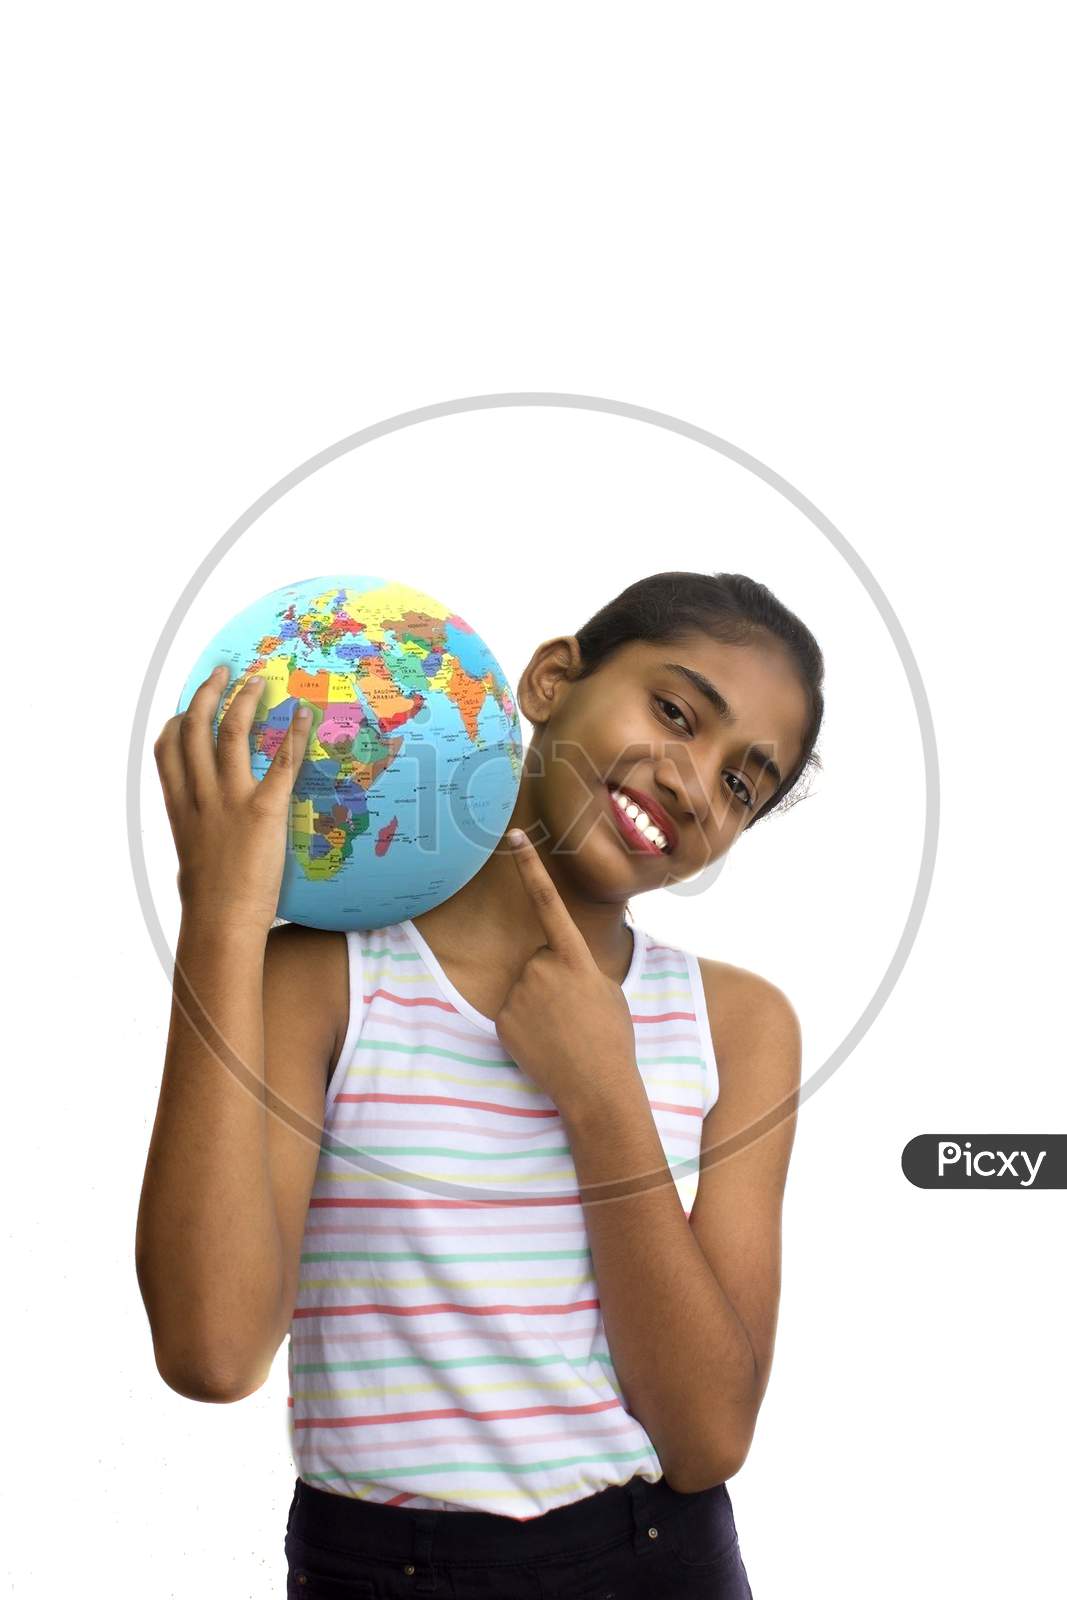 Portrait of a Young Indian Girl with Globe